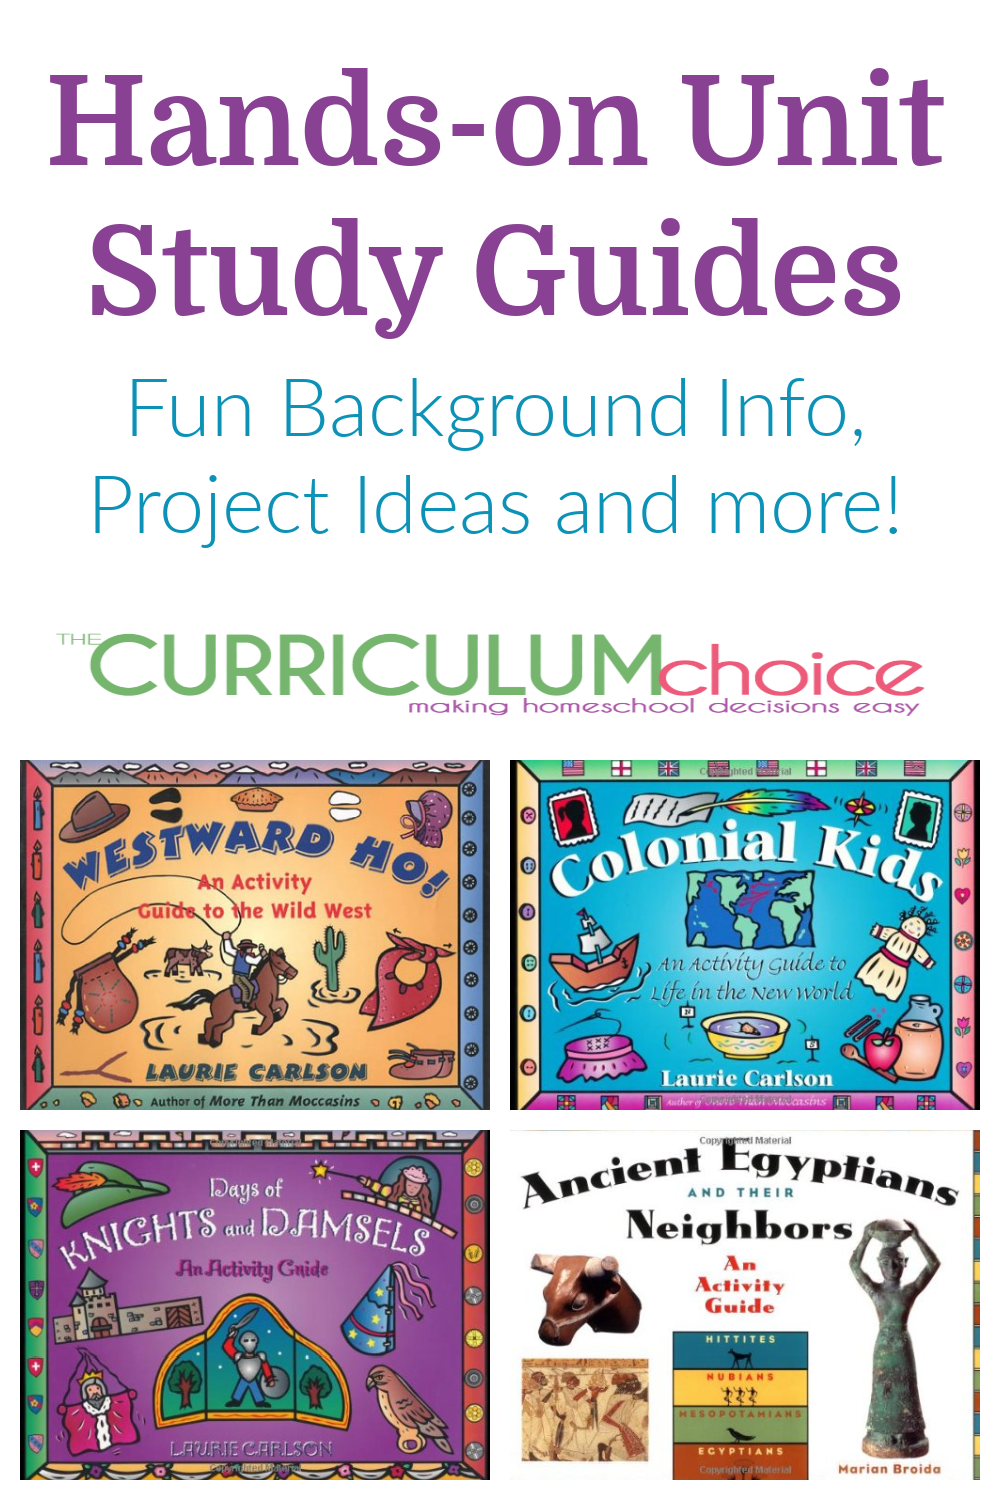 Hands-on Unit Study Guides make great spines for unit studies with lots of background information, hands-on project ideas and more! A review from The Curriculum Choice